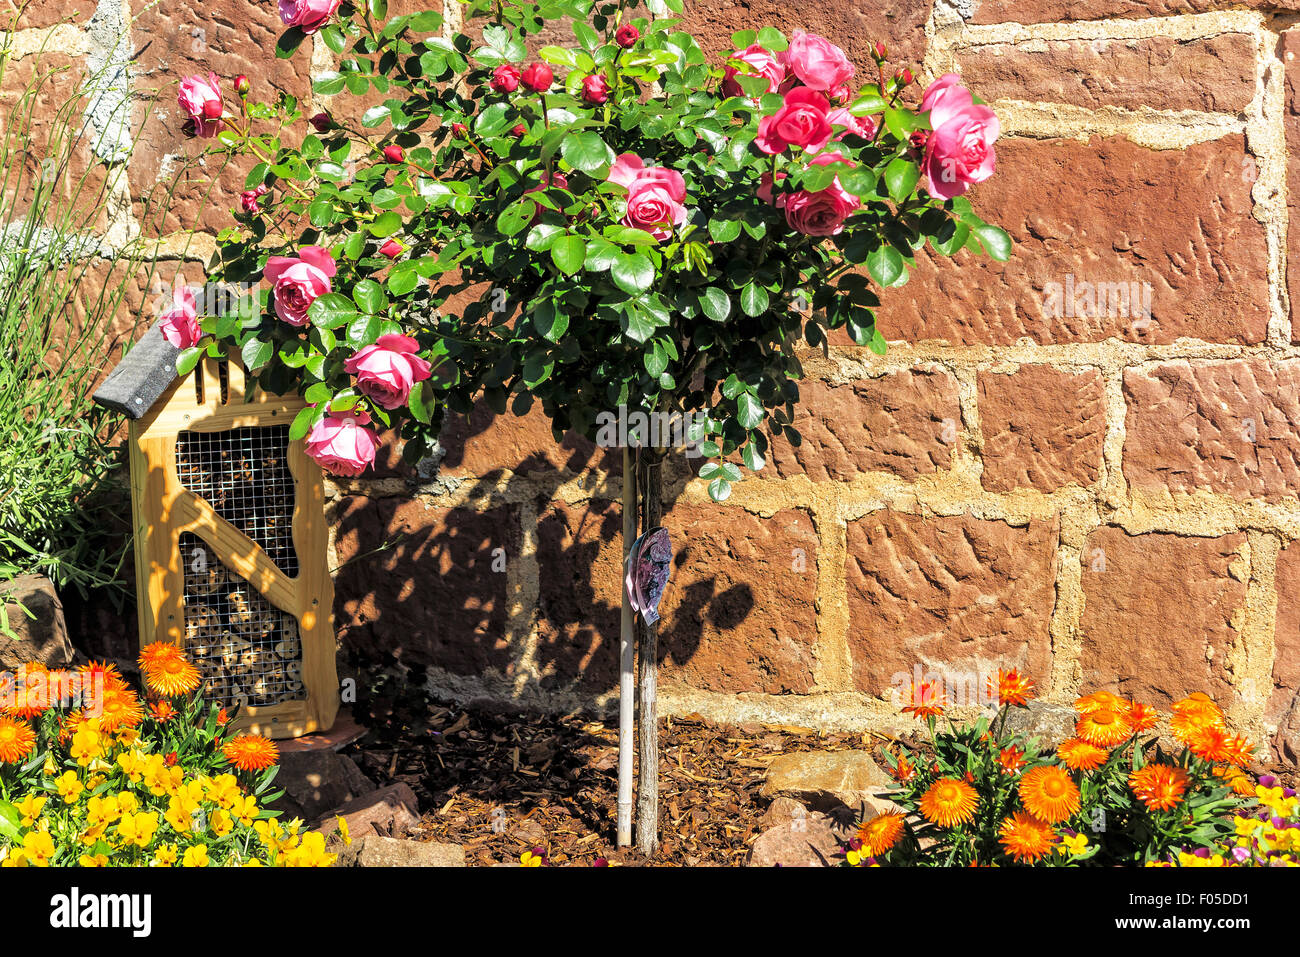 Pink stem roses and strawflowers in front of stone wall in a garden Stock Photo